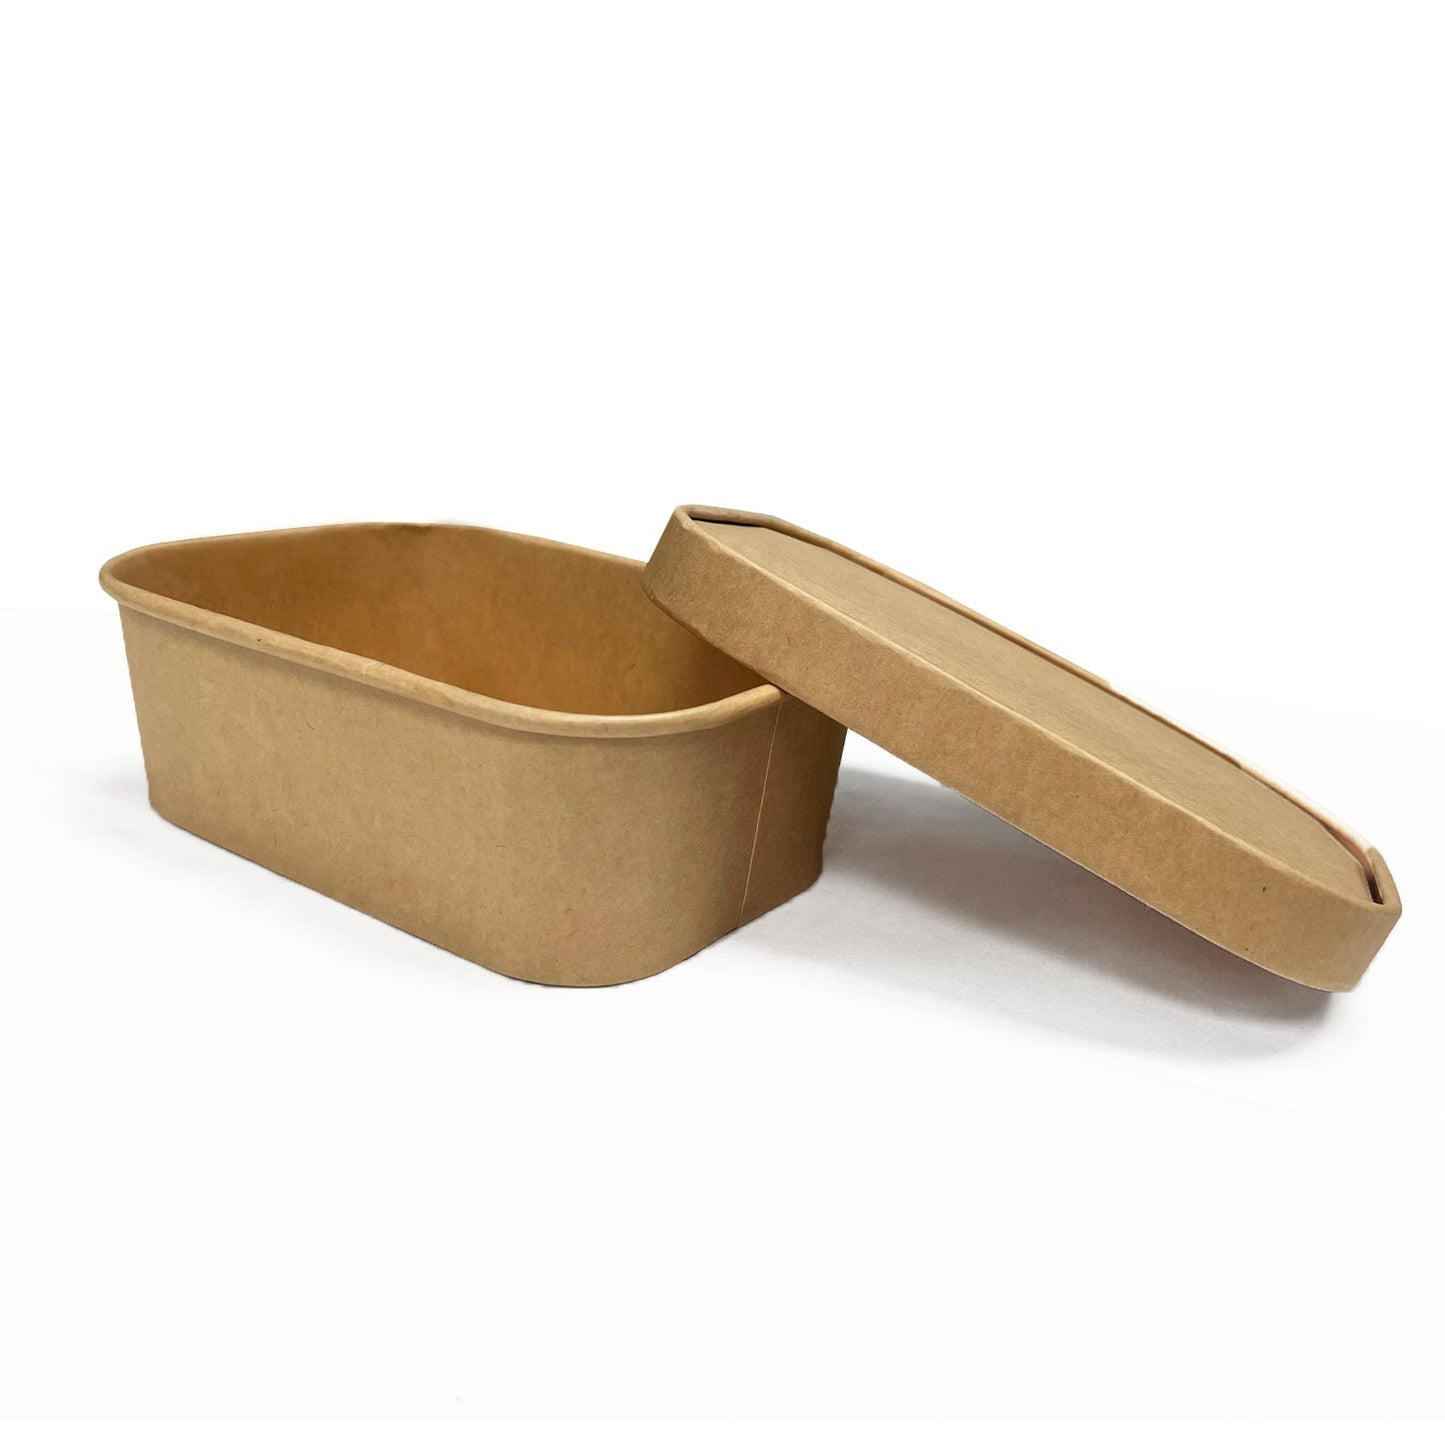 KIS-FC1000 | 34oz, 1000ml Kraft Paper Rectangle Containers Base; From $0.234/pc